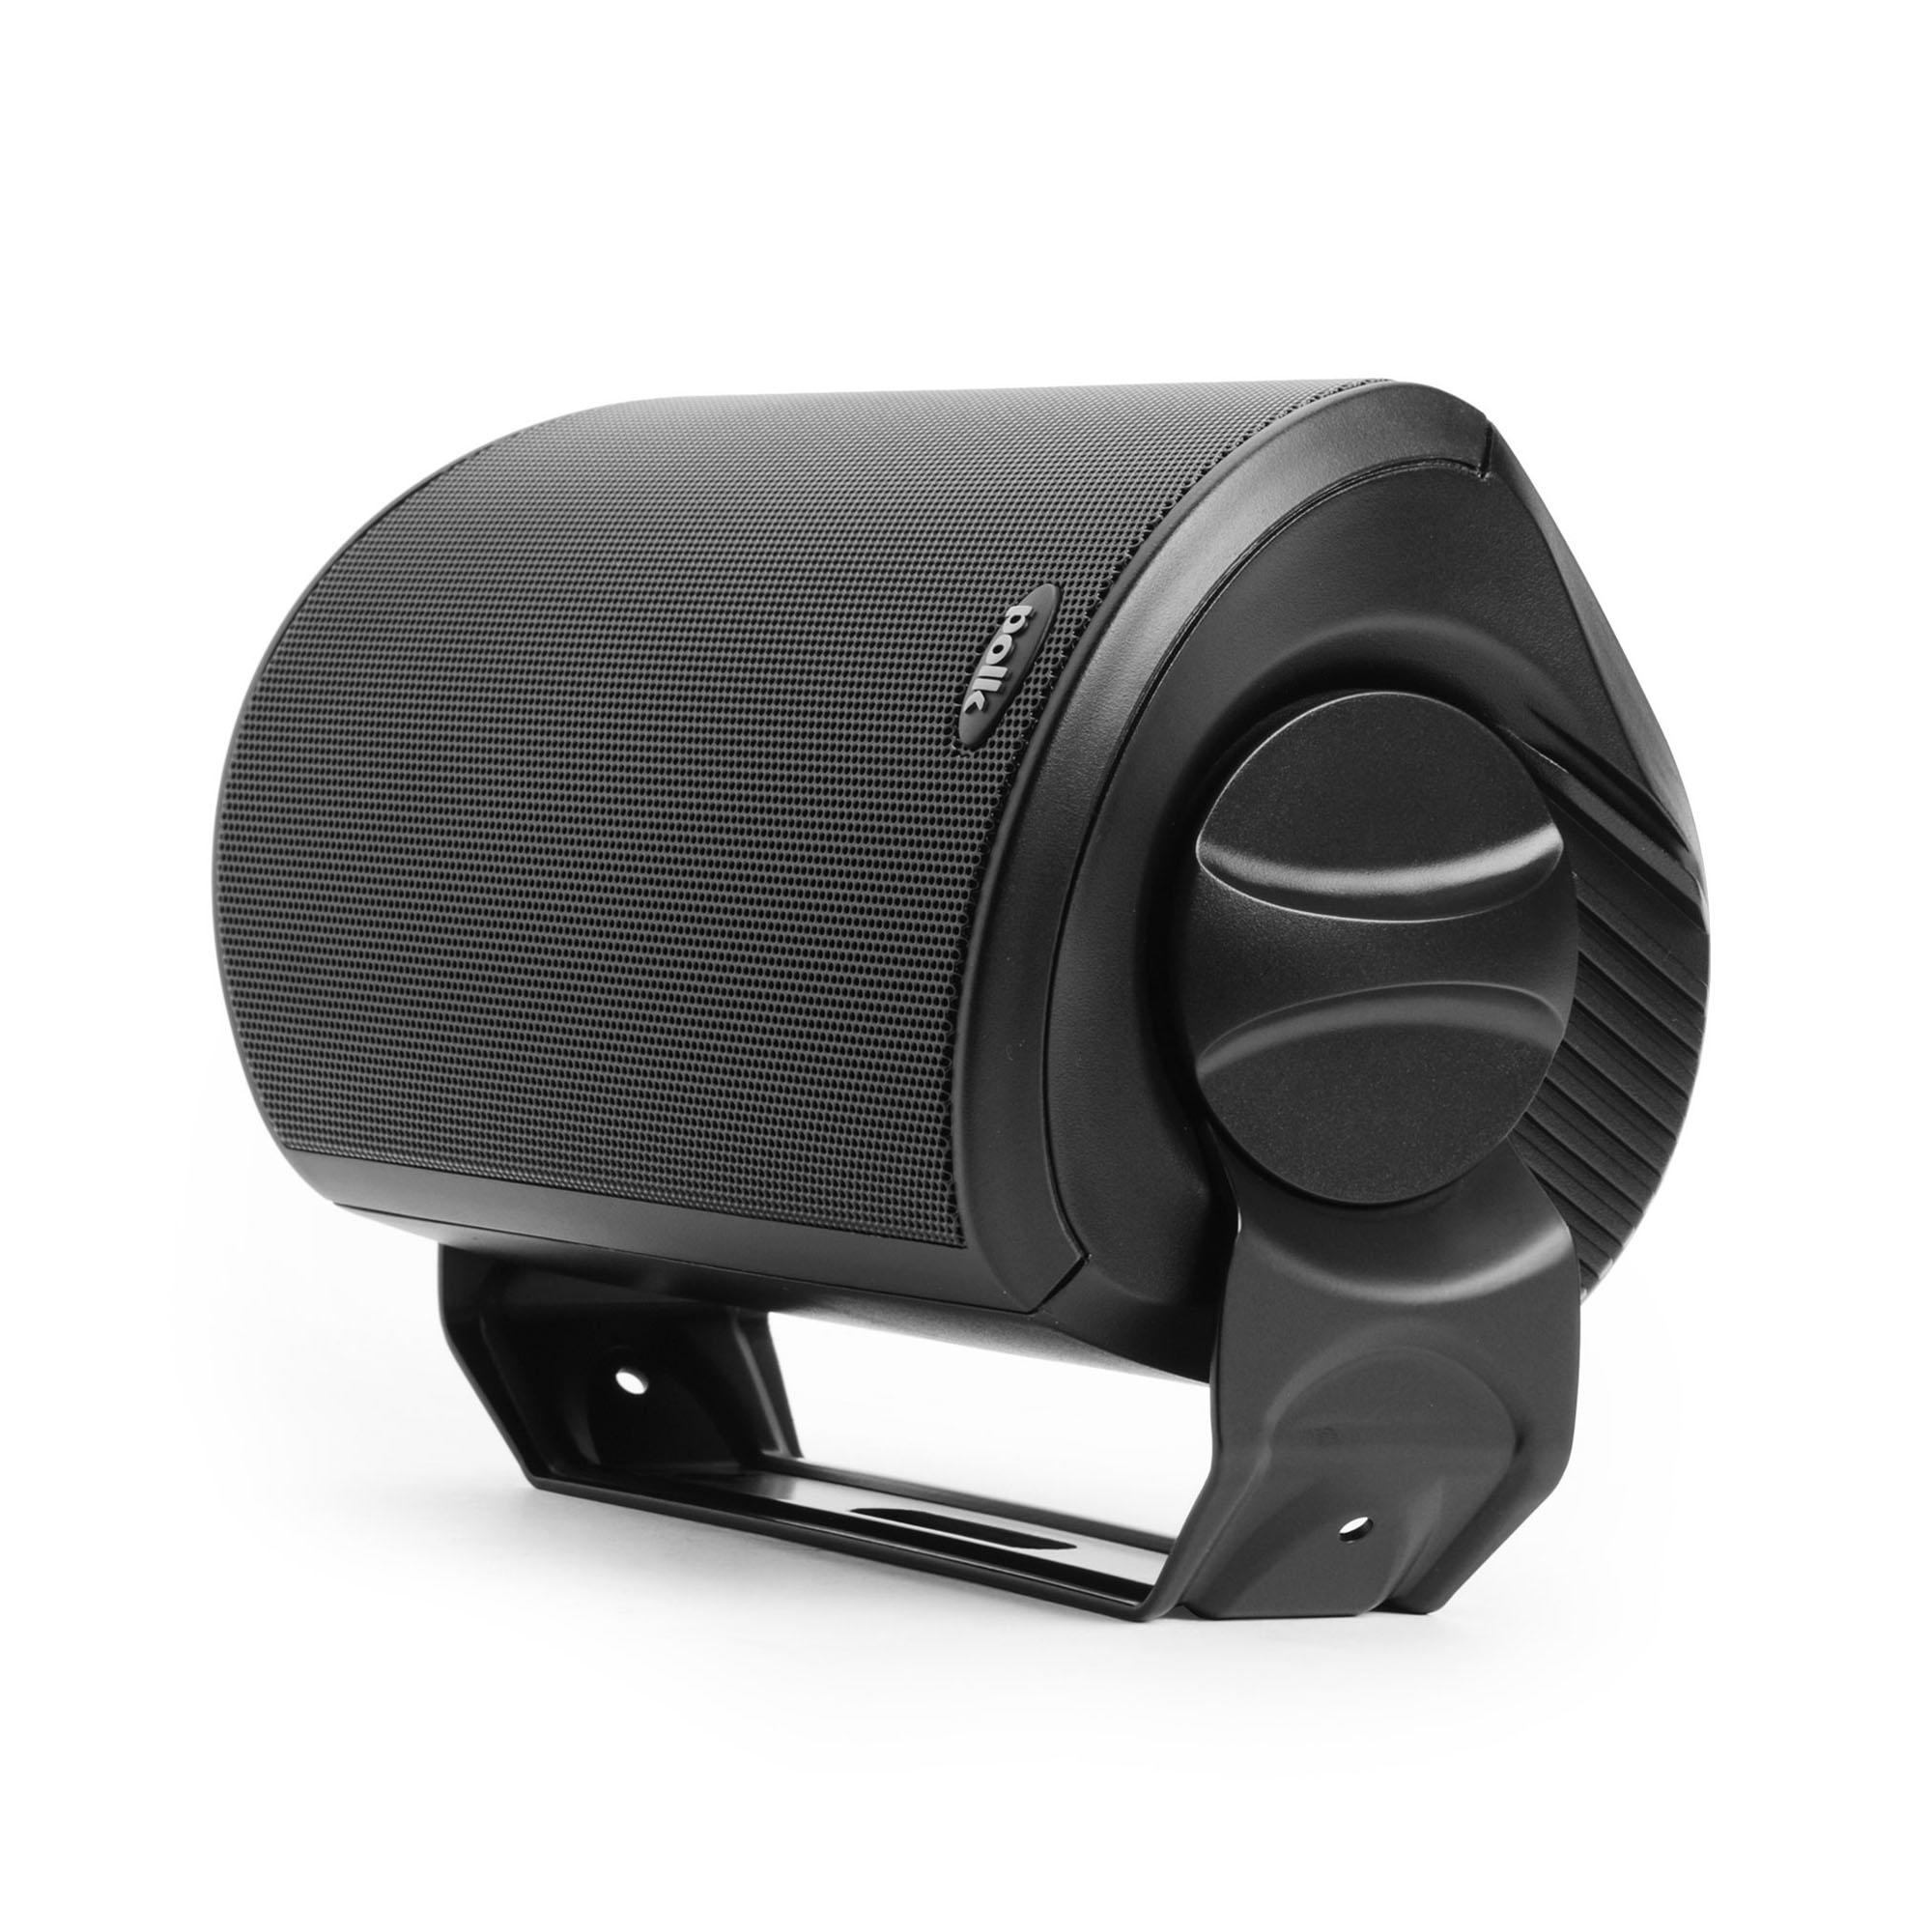 PO-ATRIUM-4 All-weather outdoor loudspeaker with 4.5in Drivers and 3/4in Tweeters (pair). Black or White.